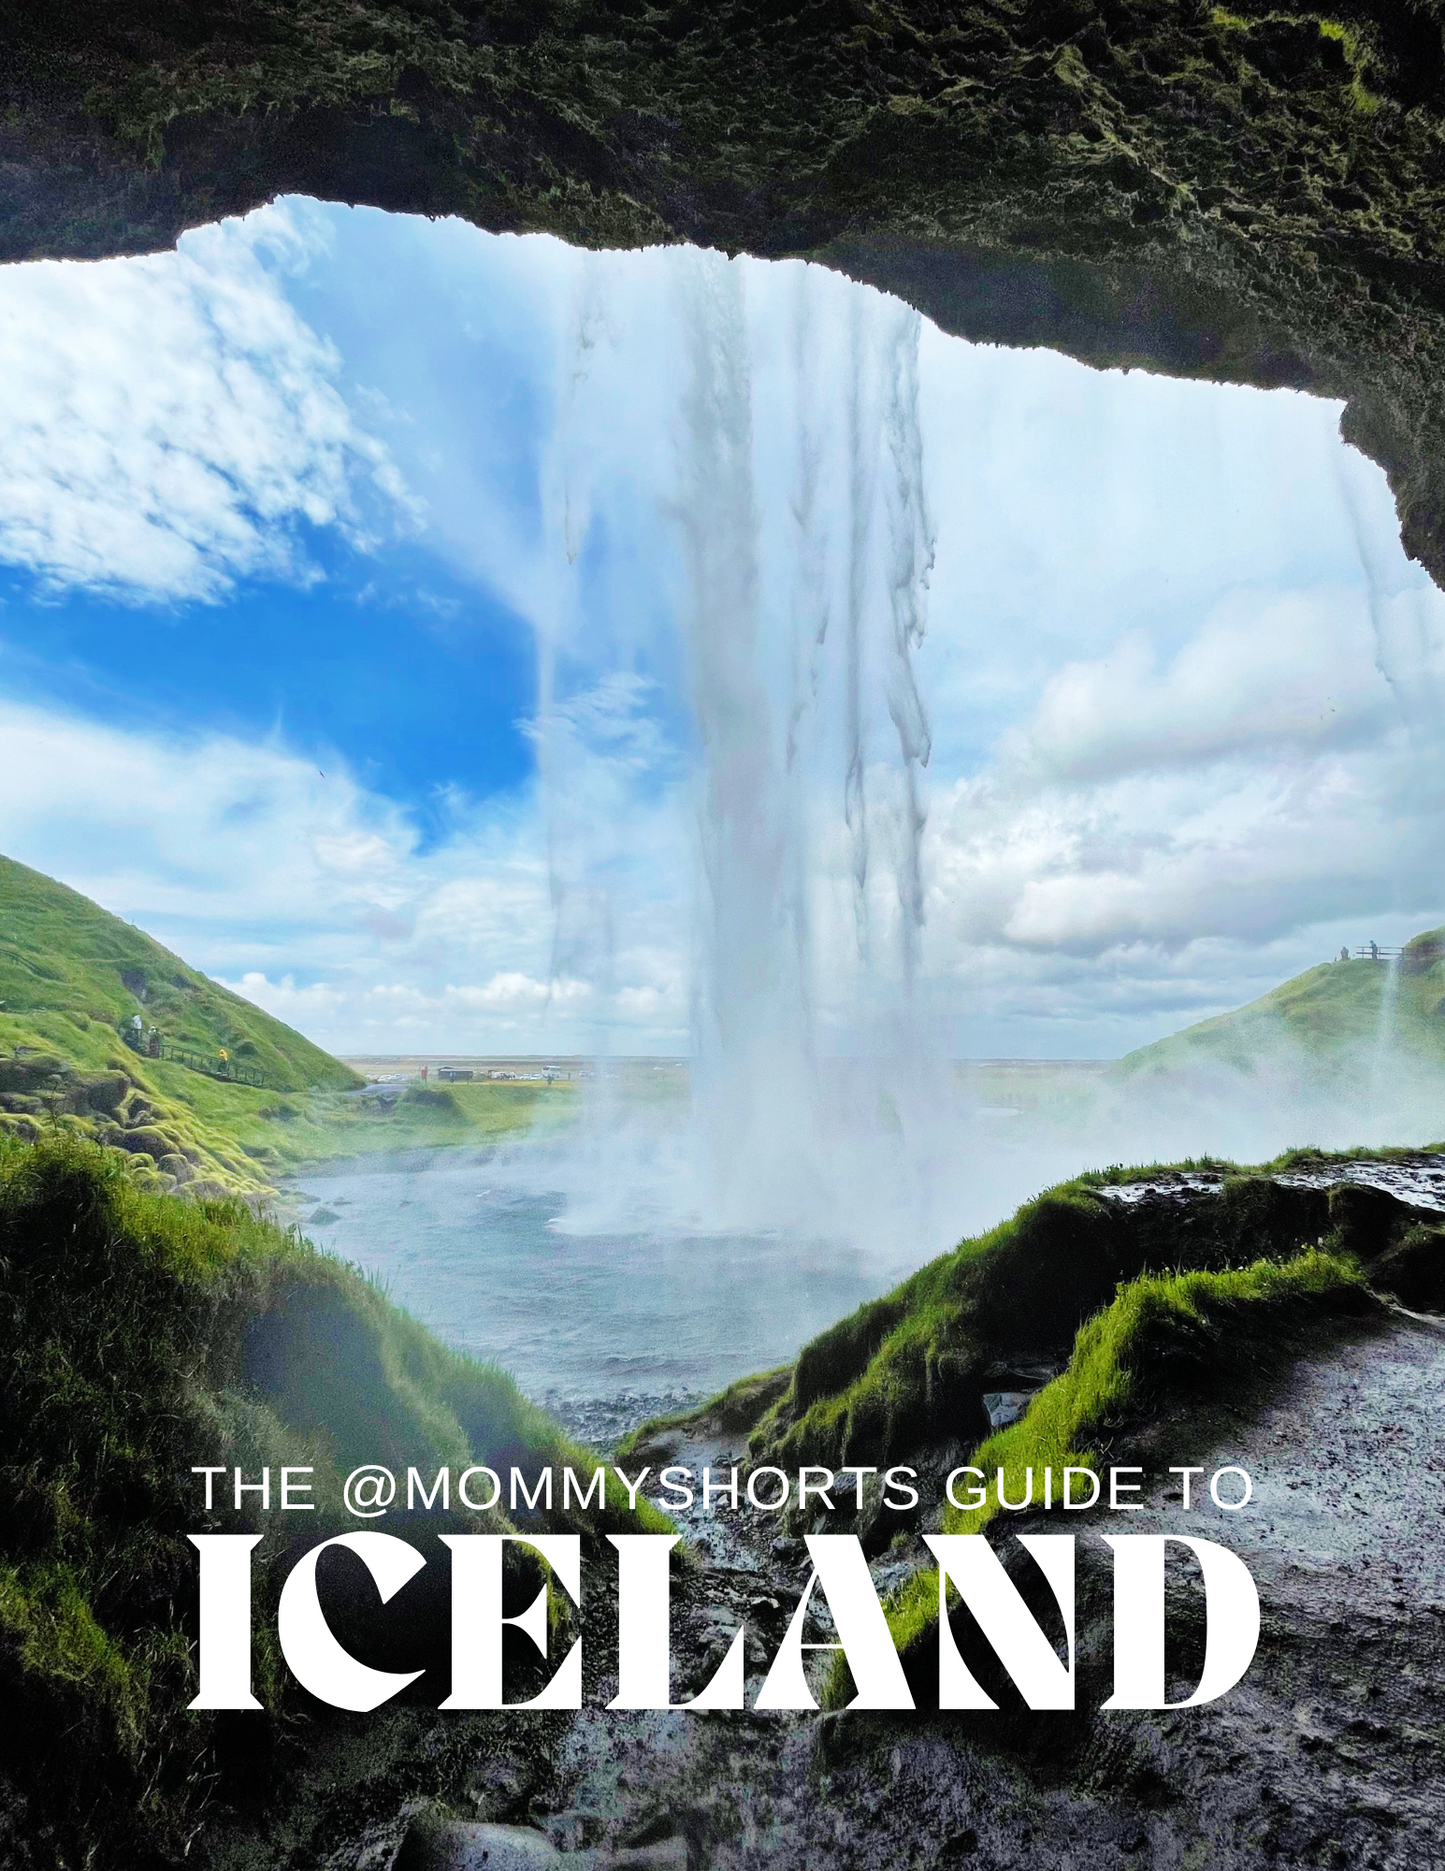 The Mommy Shorts Guide to Iceland PDF